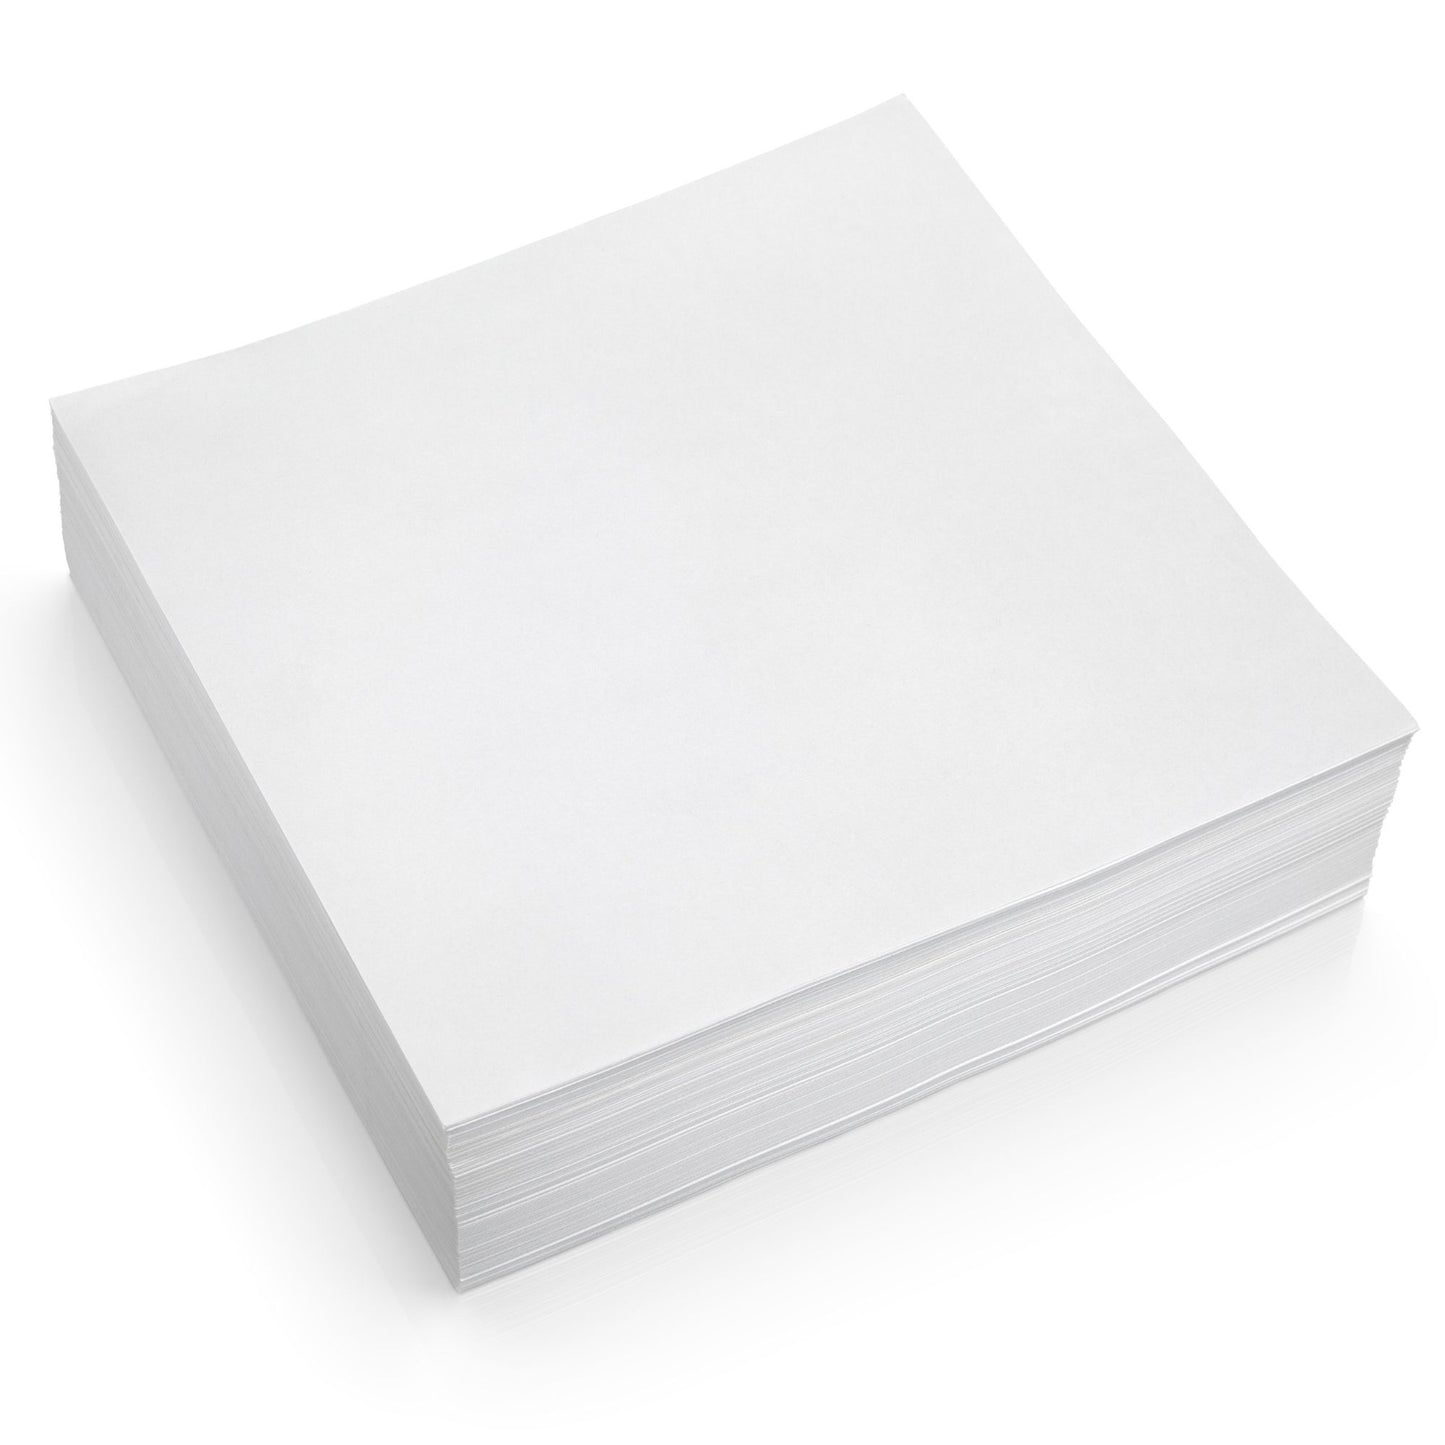 Precut Butcher Paper Sheets Fits Oven Mitts (2 sizes) for Sublimation & Heat Press Crafts, White, Uncoated